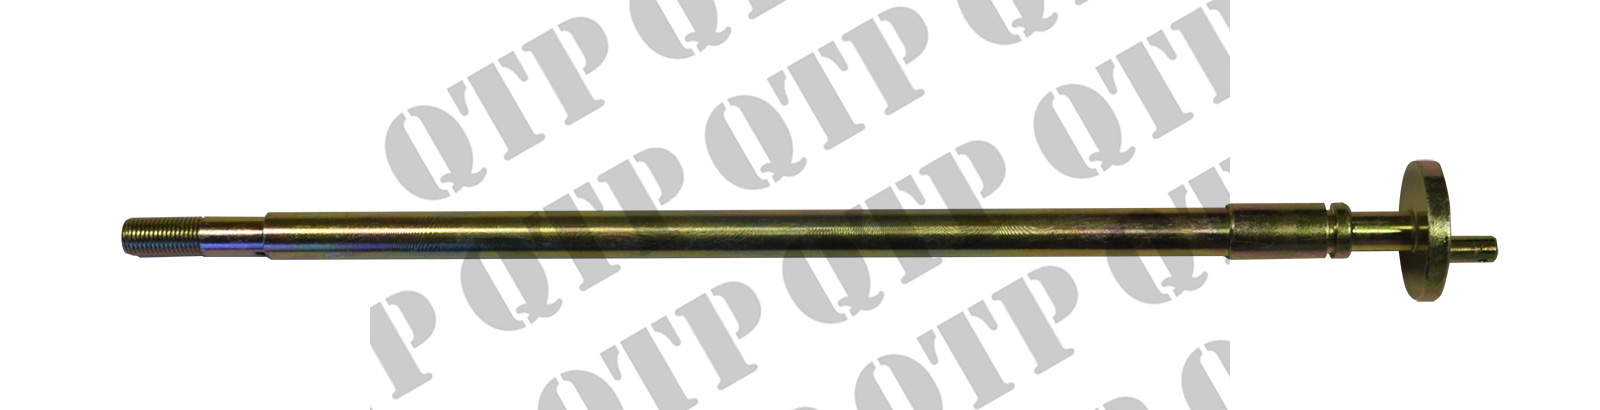 Draft Control Rod 135 165 From Serial Number